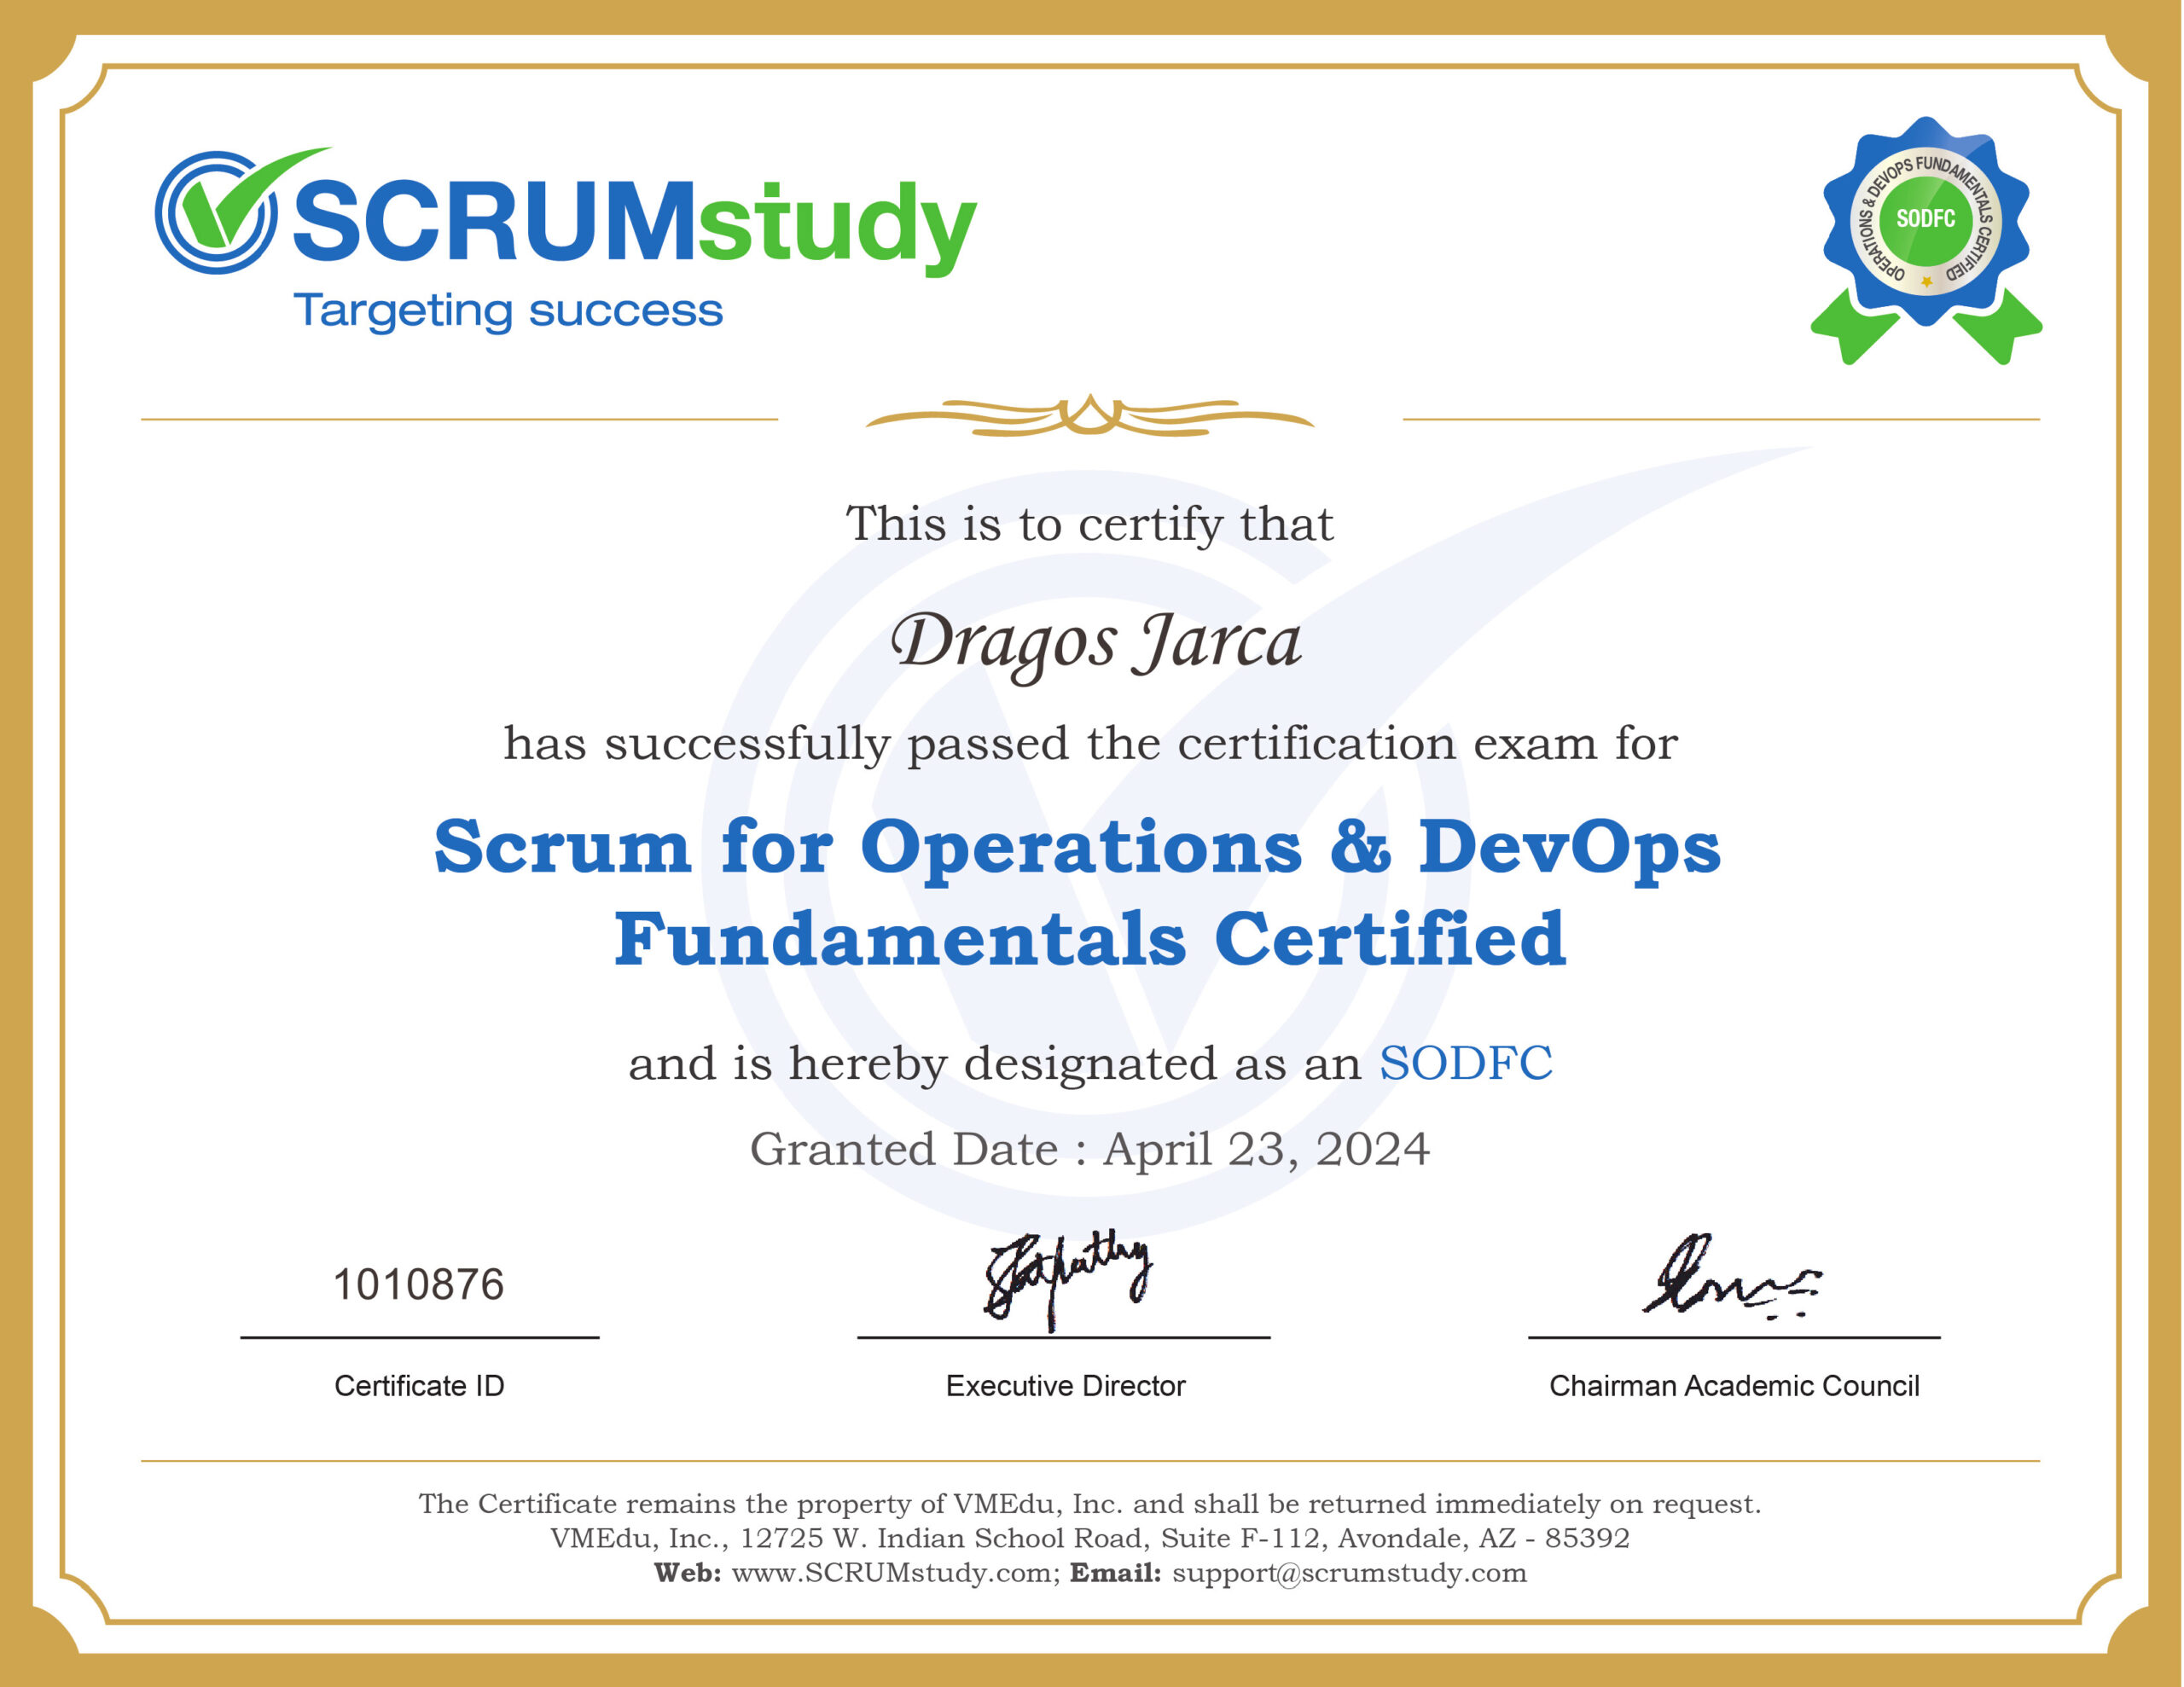 Scrum for Operations and DevOps Fundamentals Certified